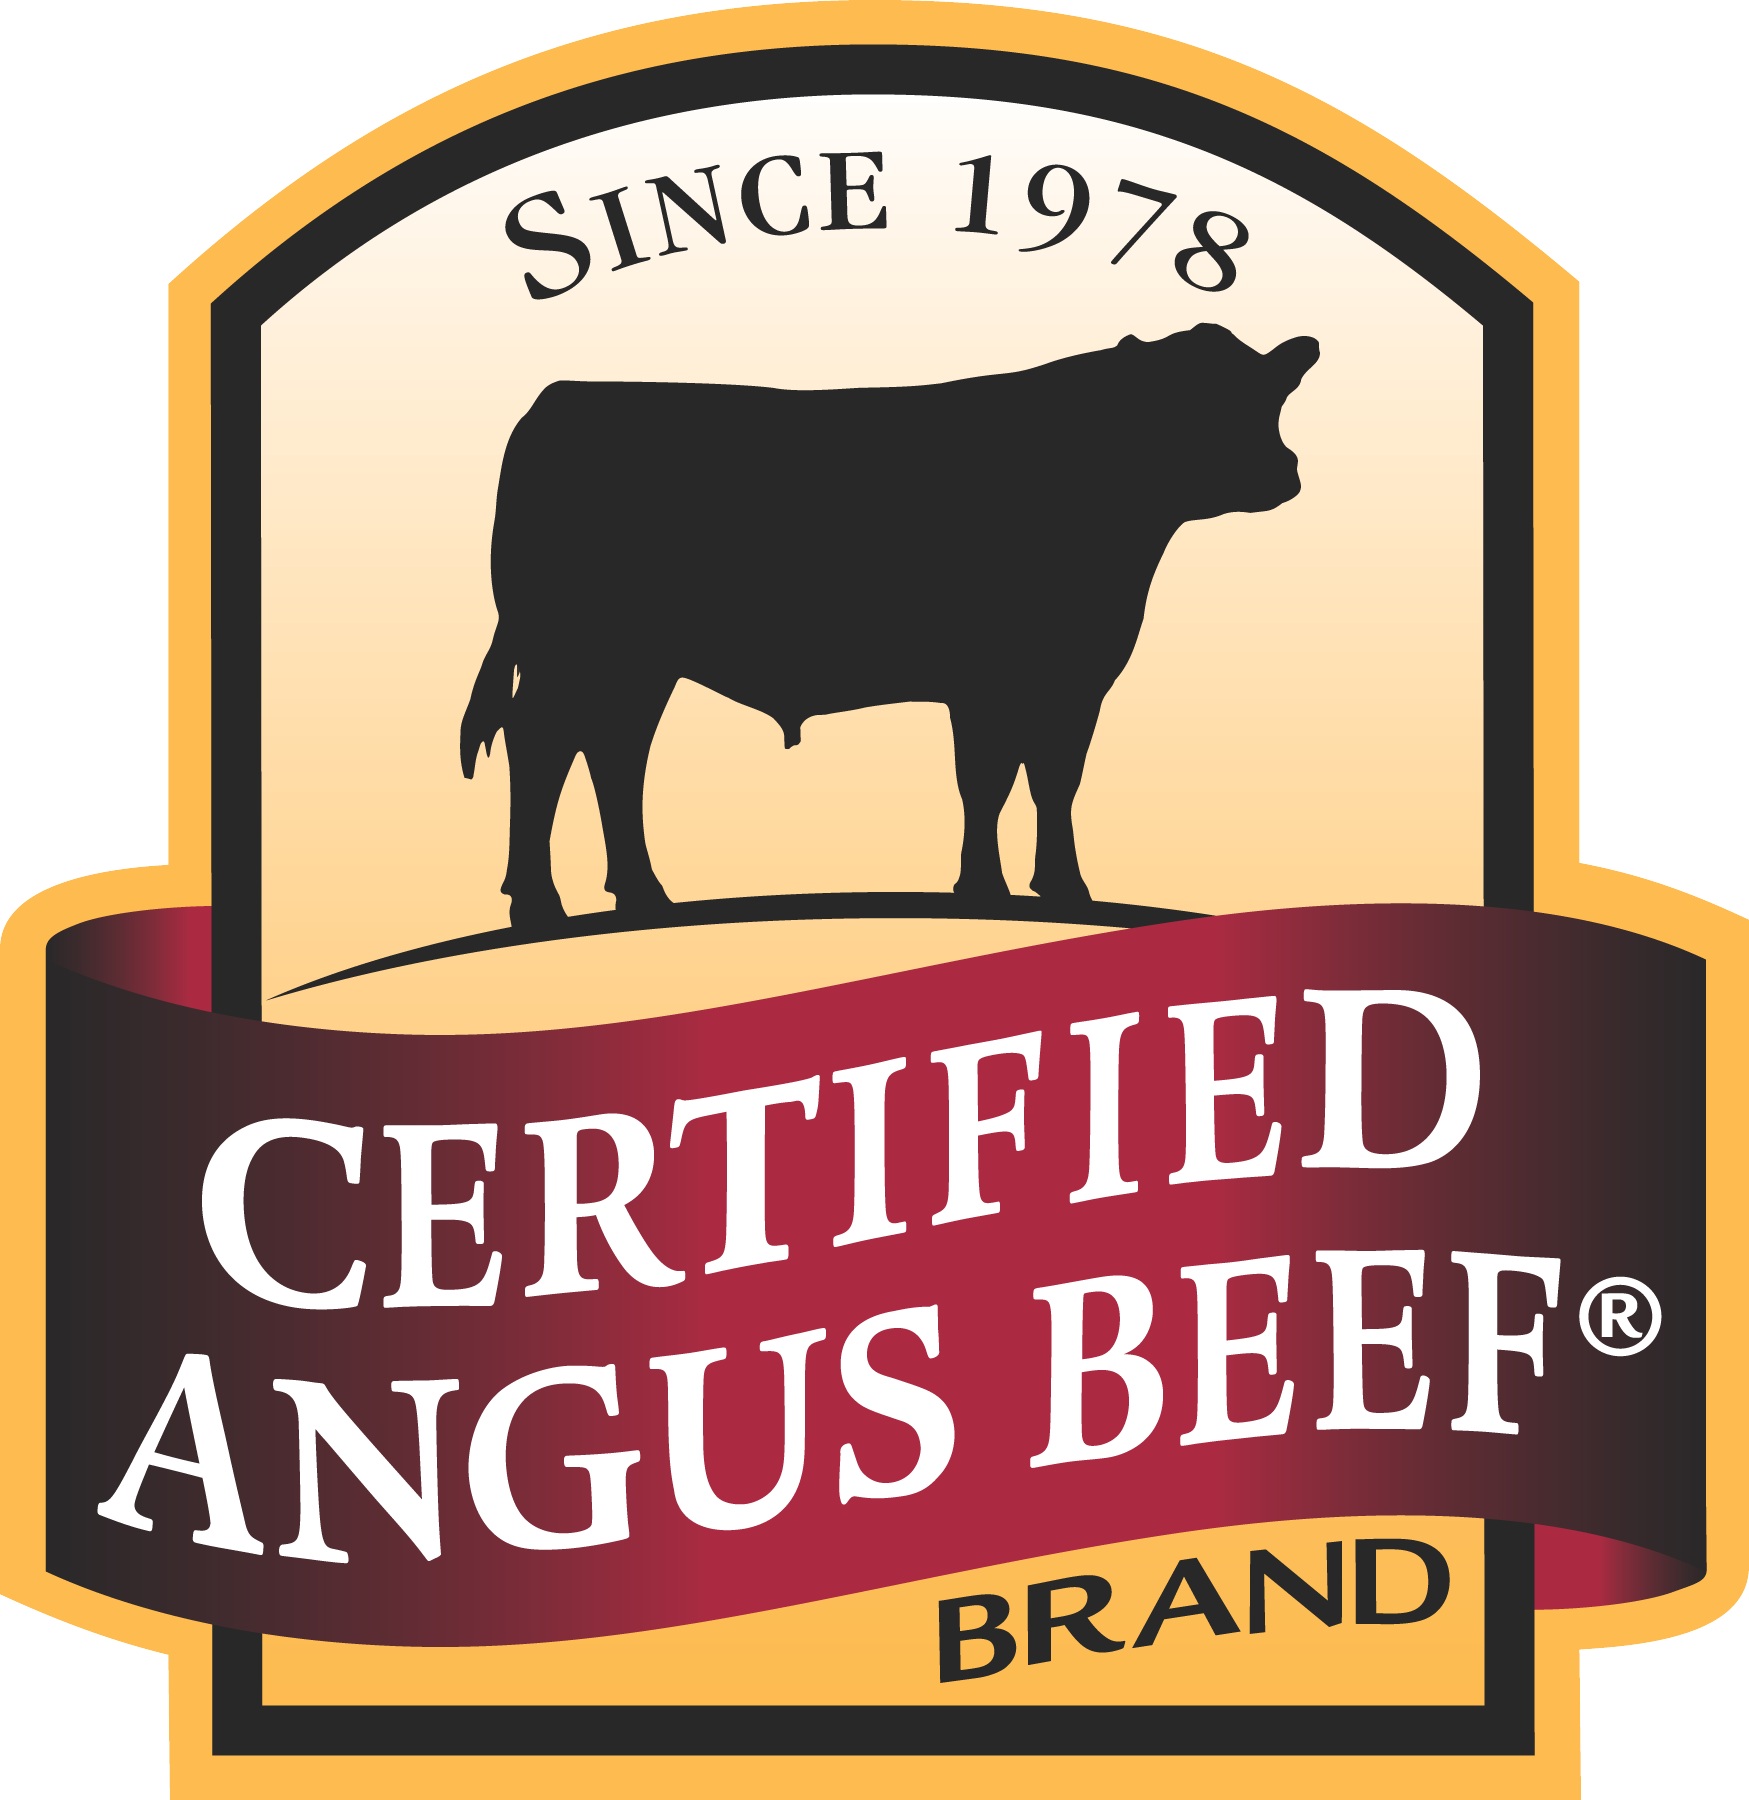 Certified-Angus-Beef-logo_burger_conquest_what_is.jpg